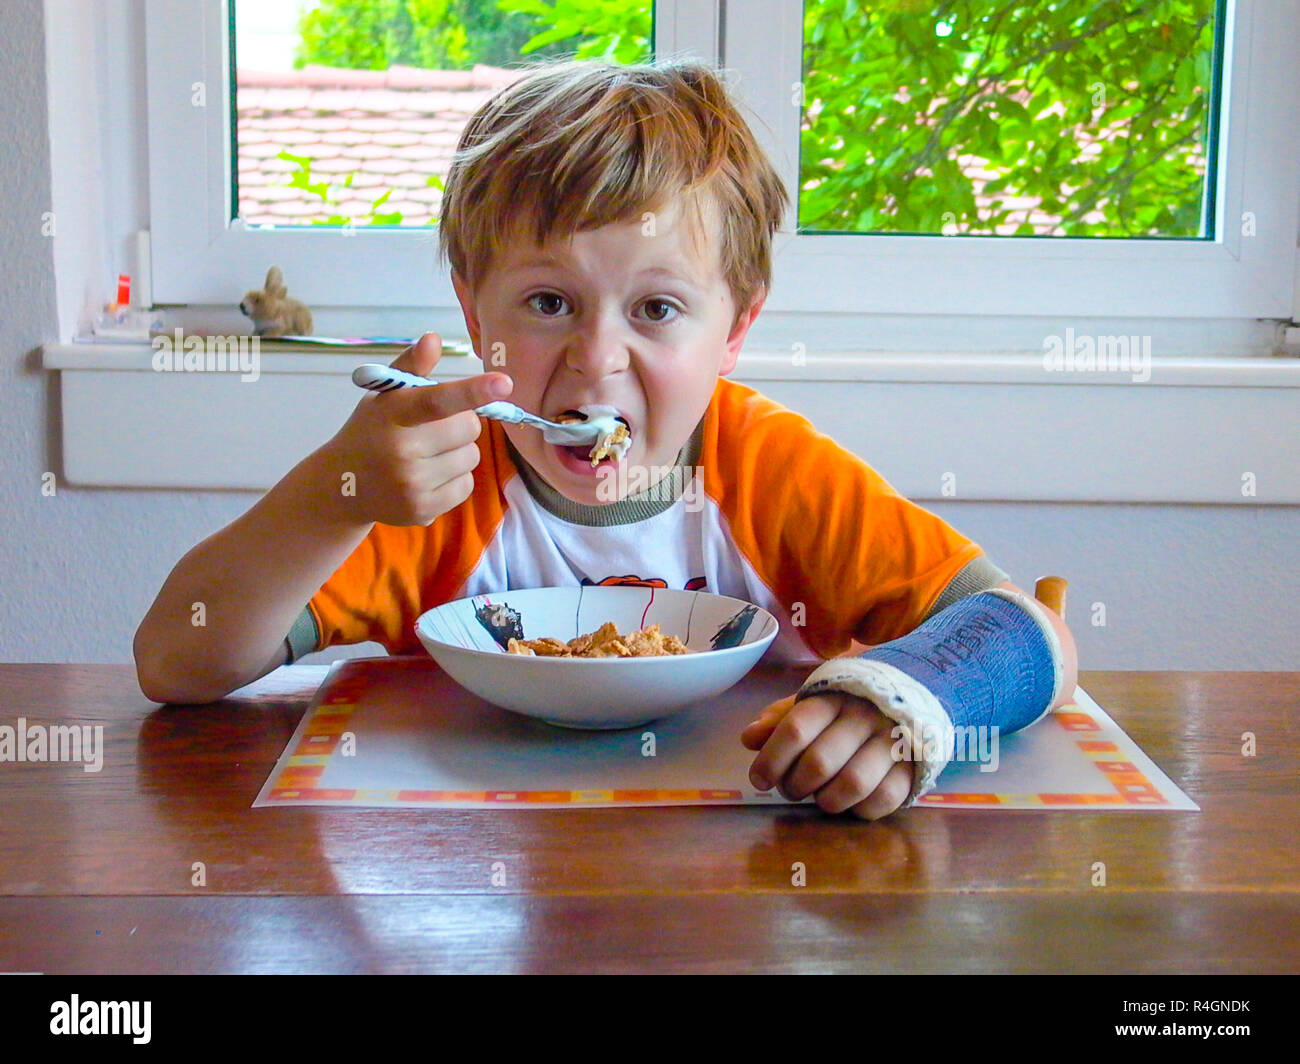 young boy with arm in cast has breakfast at the table Stock Photo